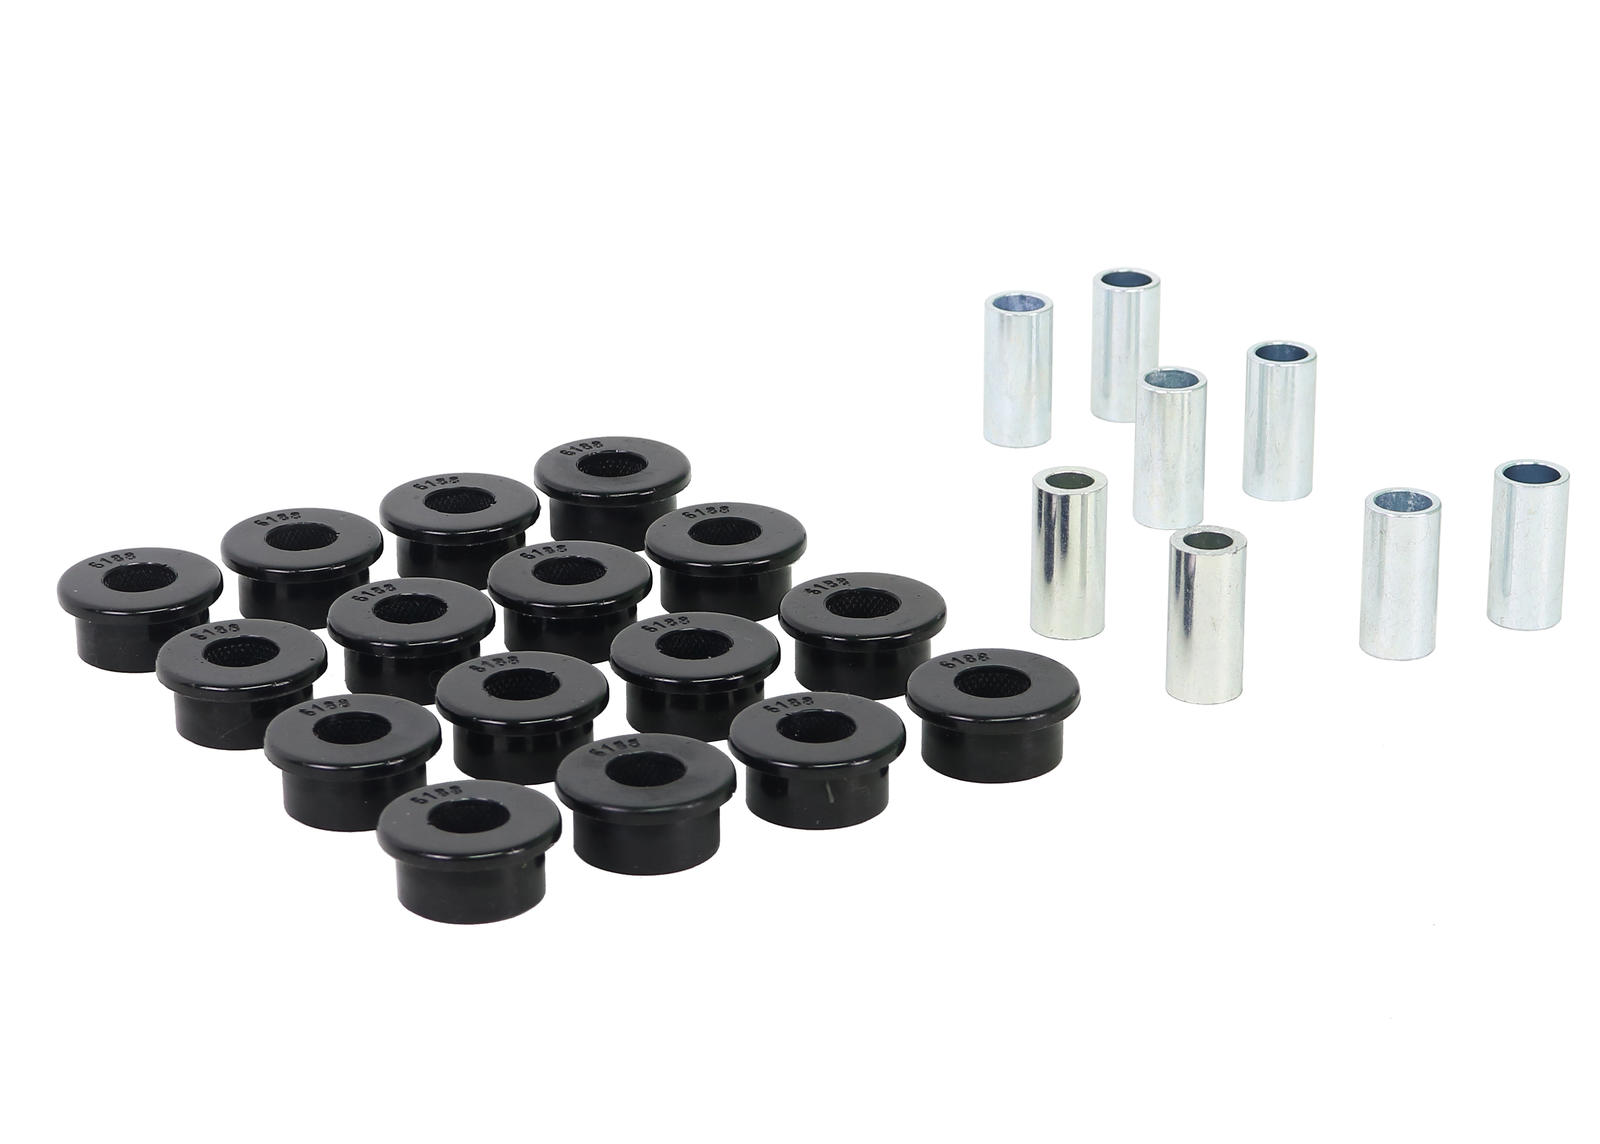 Rear Control Arm Lower - Bushing Kit to Suit Subaru Forester, Impreza, Liberty and Outback